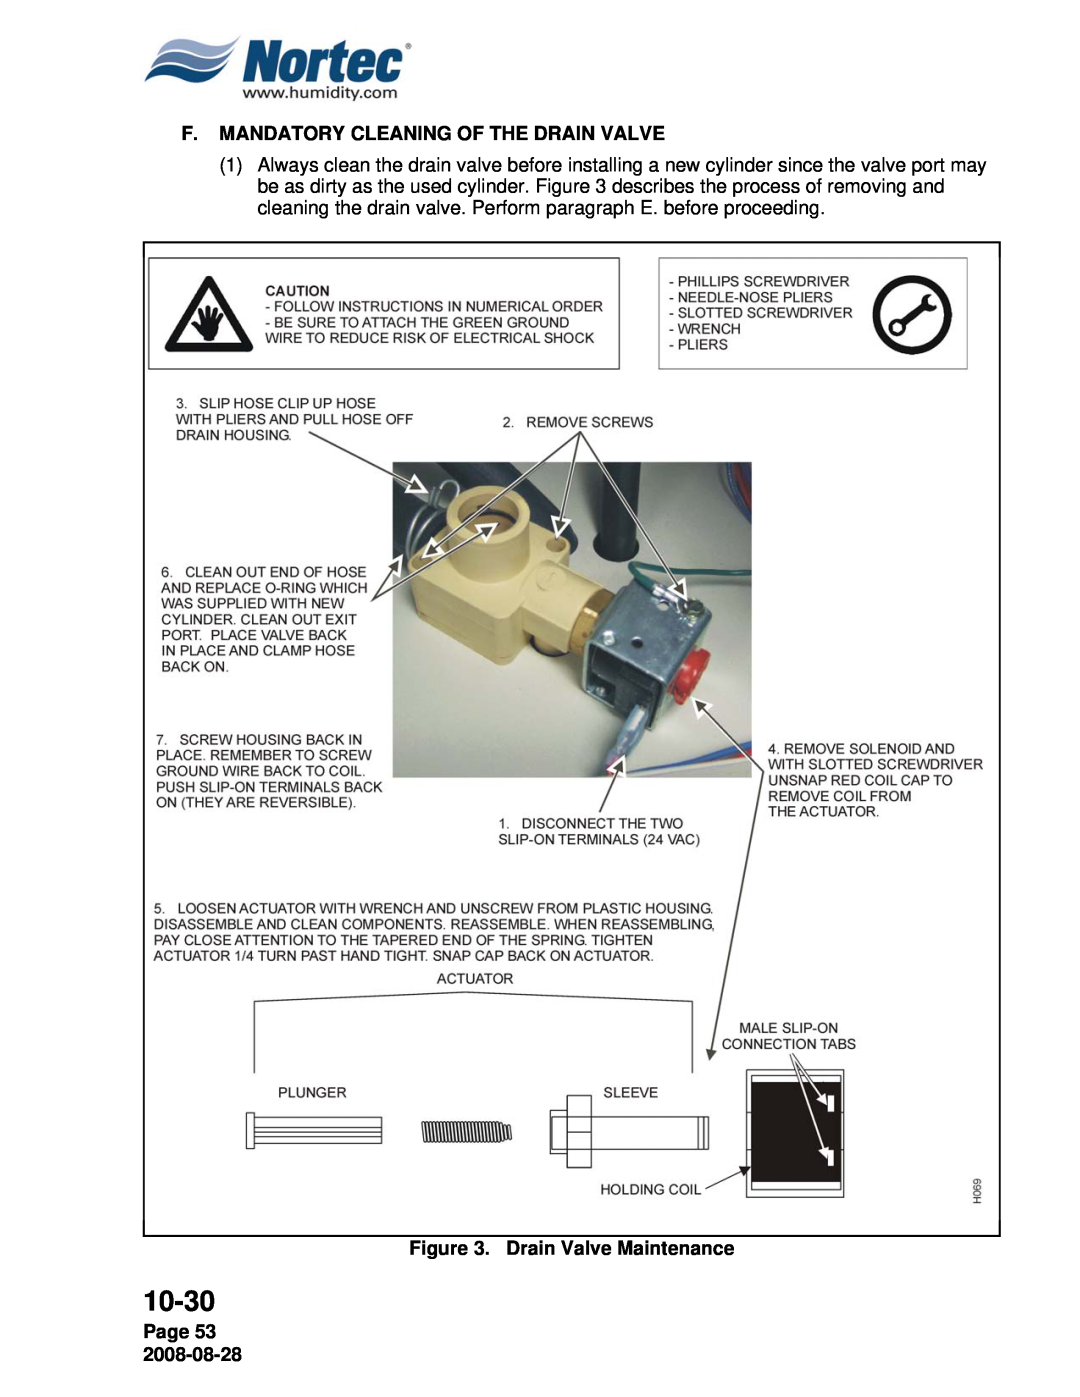 Nortec NH Series installation manual F.Mandatory Cleaning Of The Drain Valve, Drain Valve Maintenance, Page 53, 10-30 